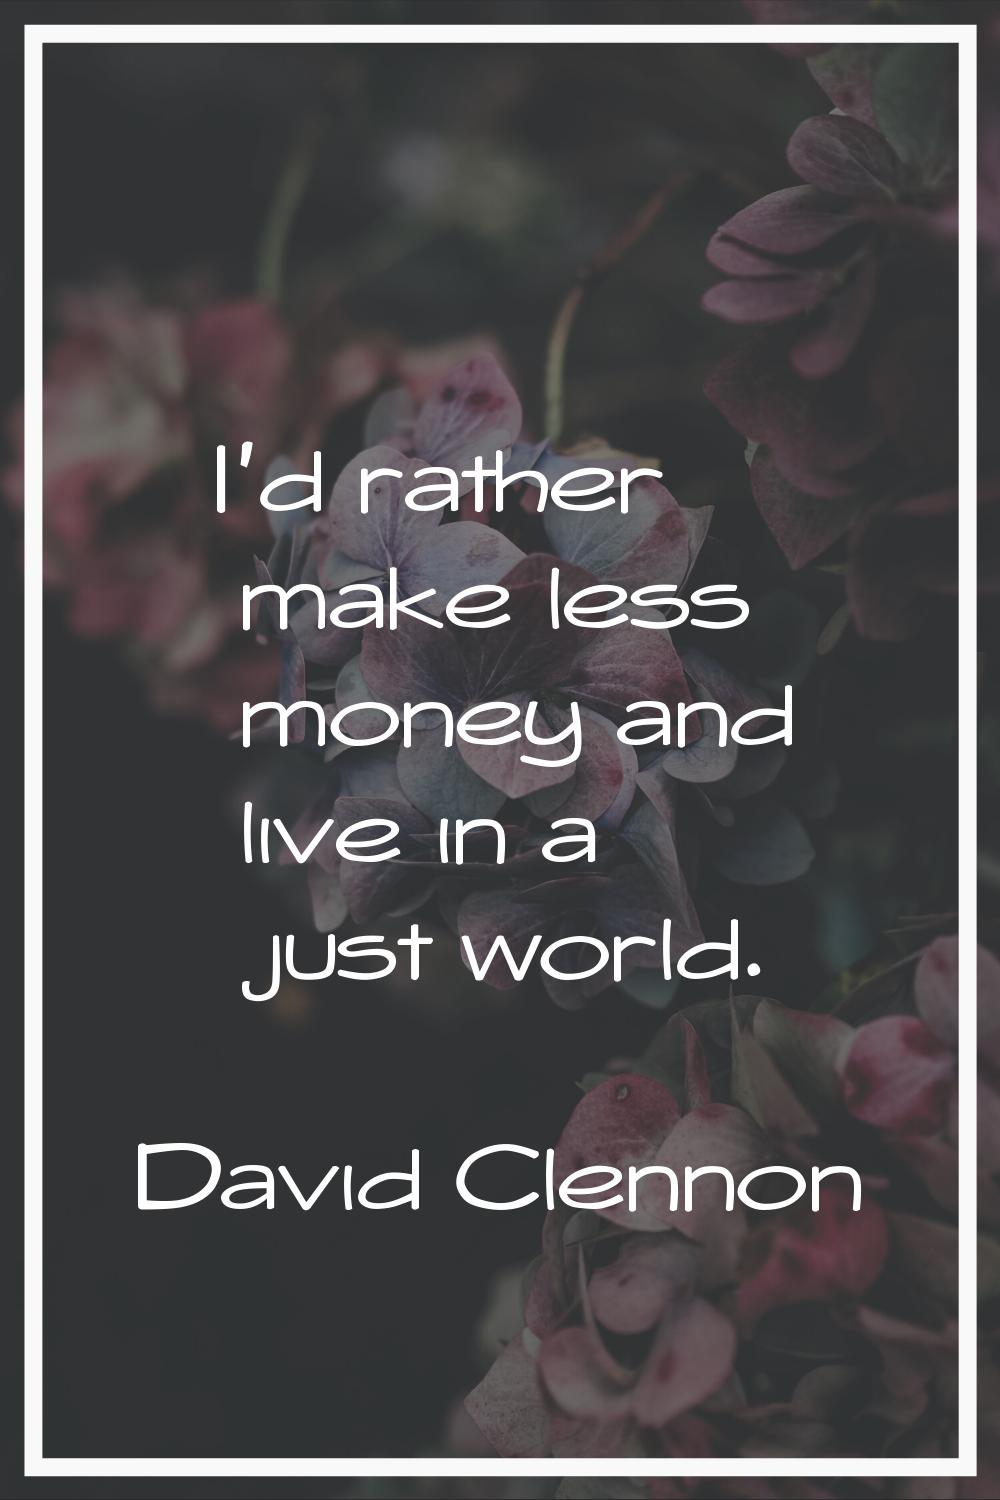 I'd rather make less money and live in a just world.